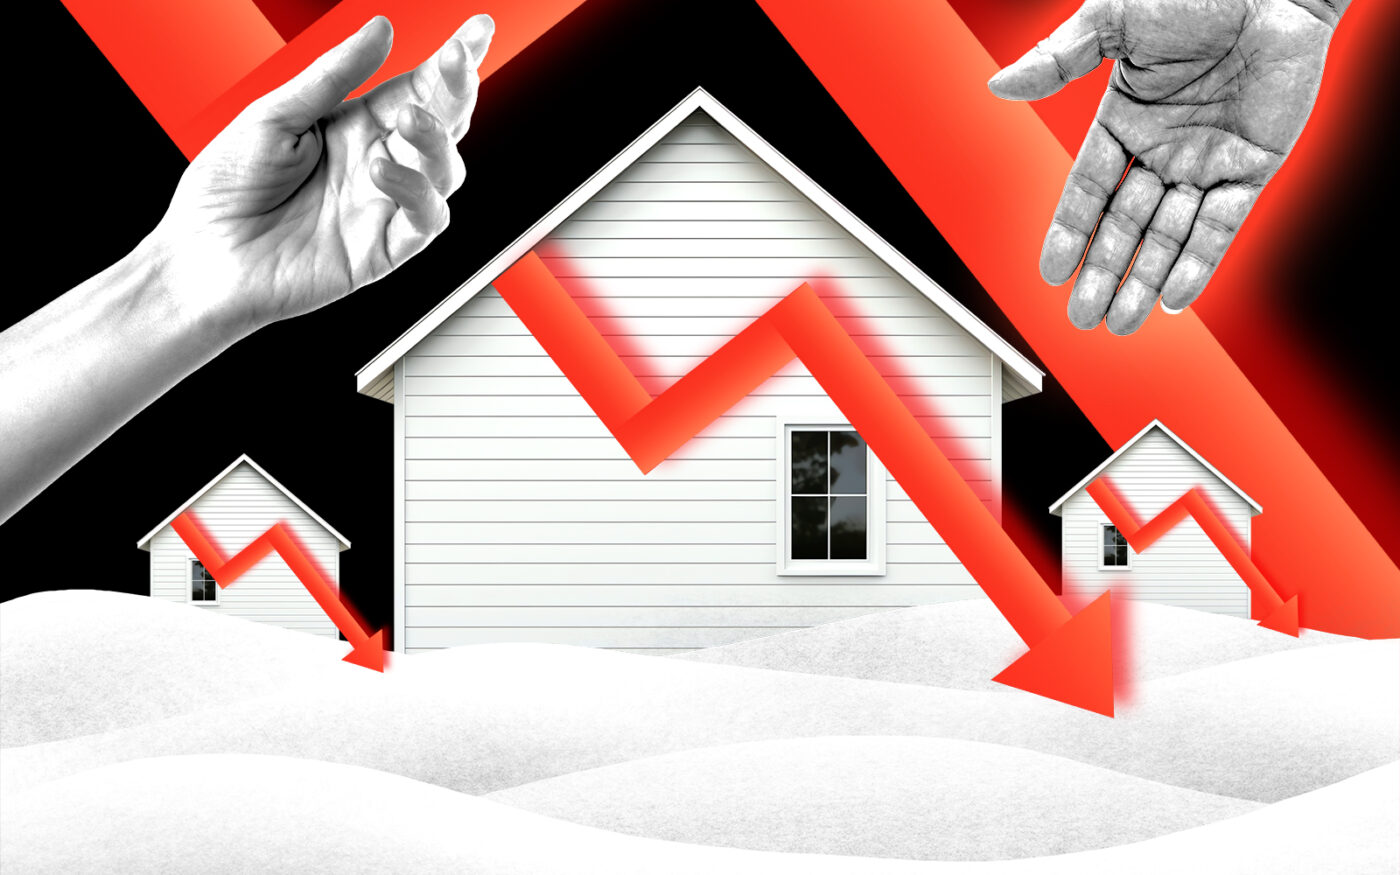 Sales Tank in May as Homebuying Costs Soar